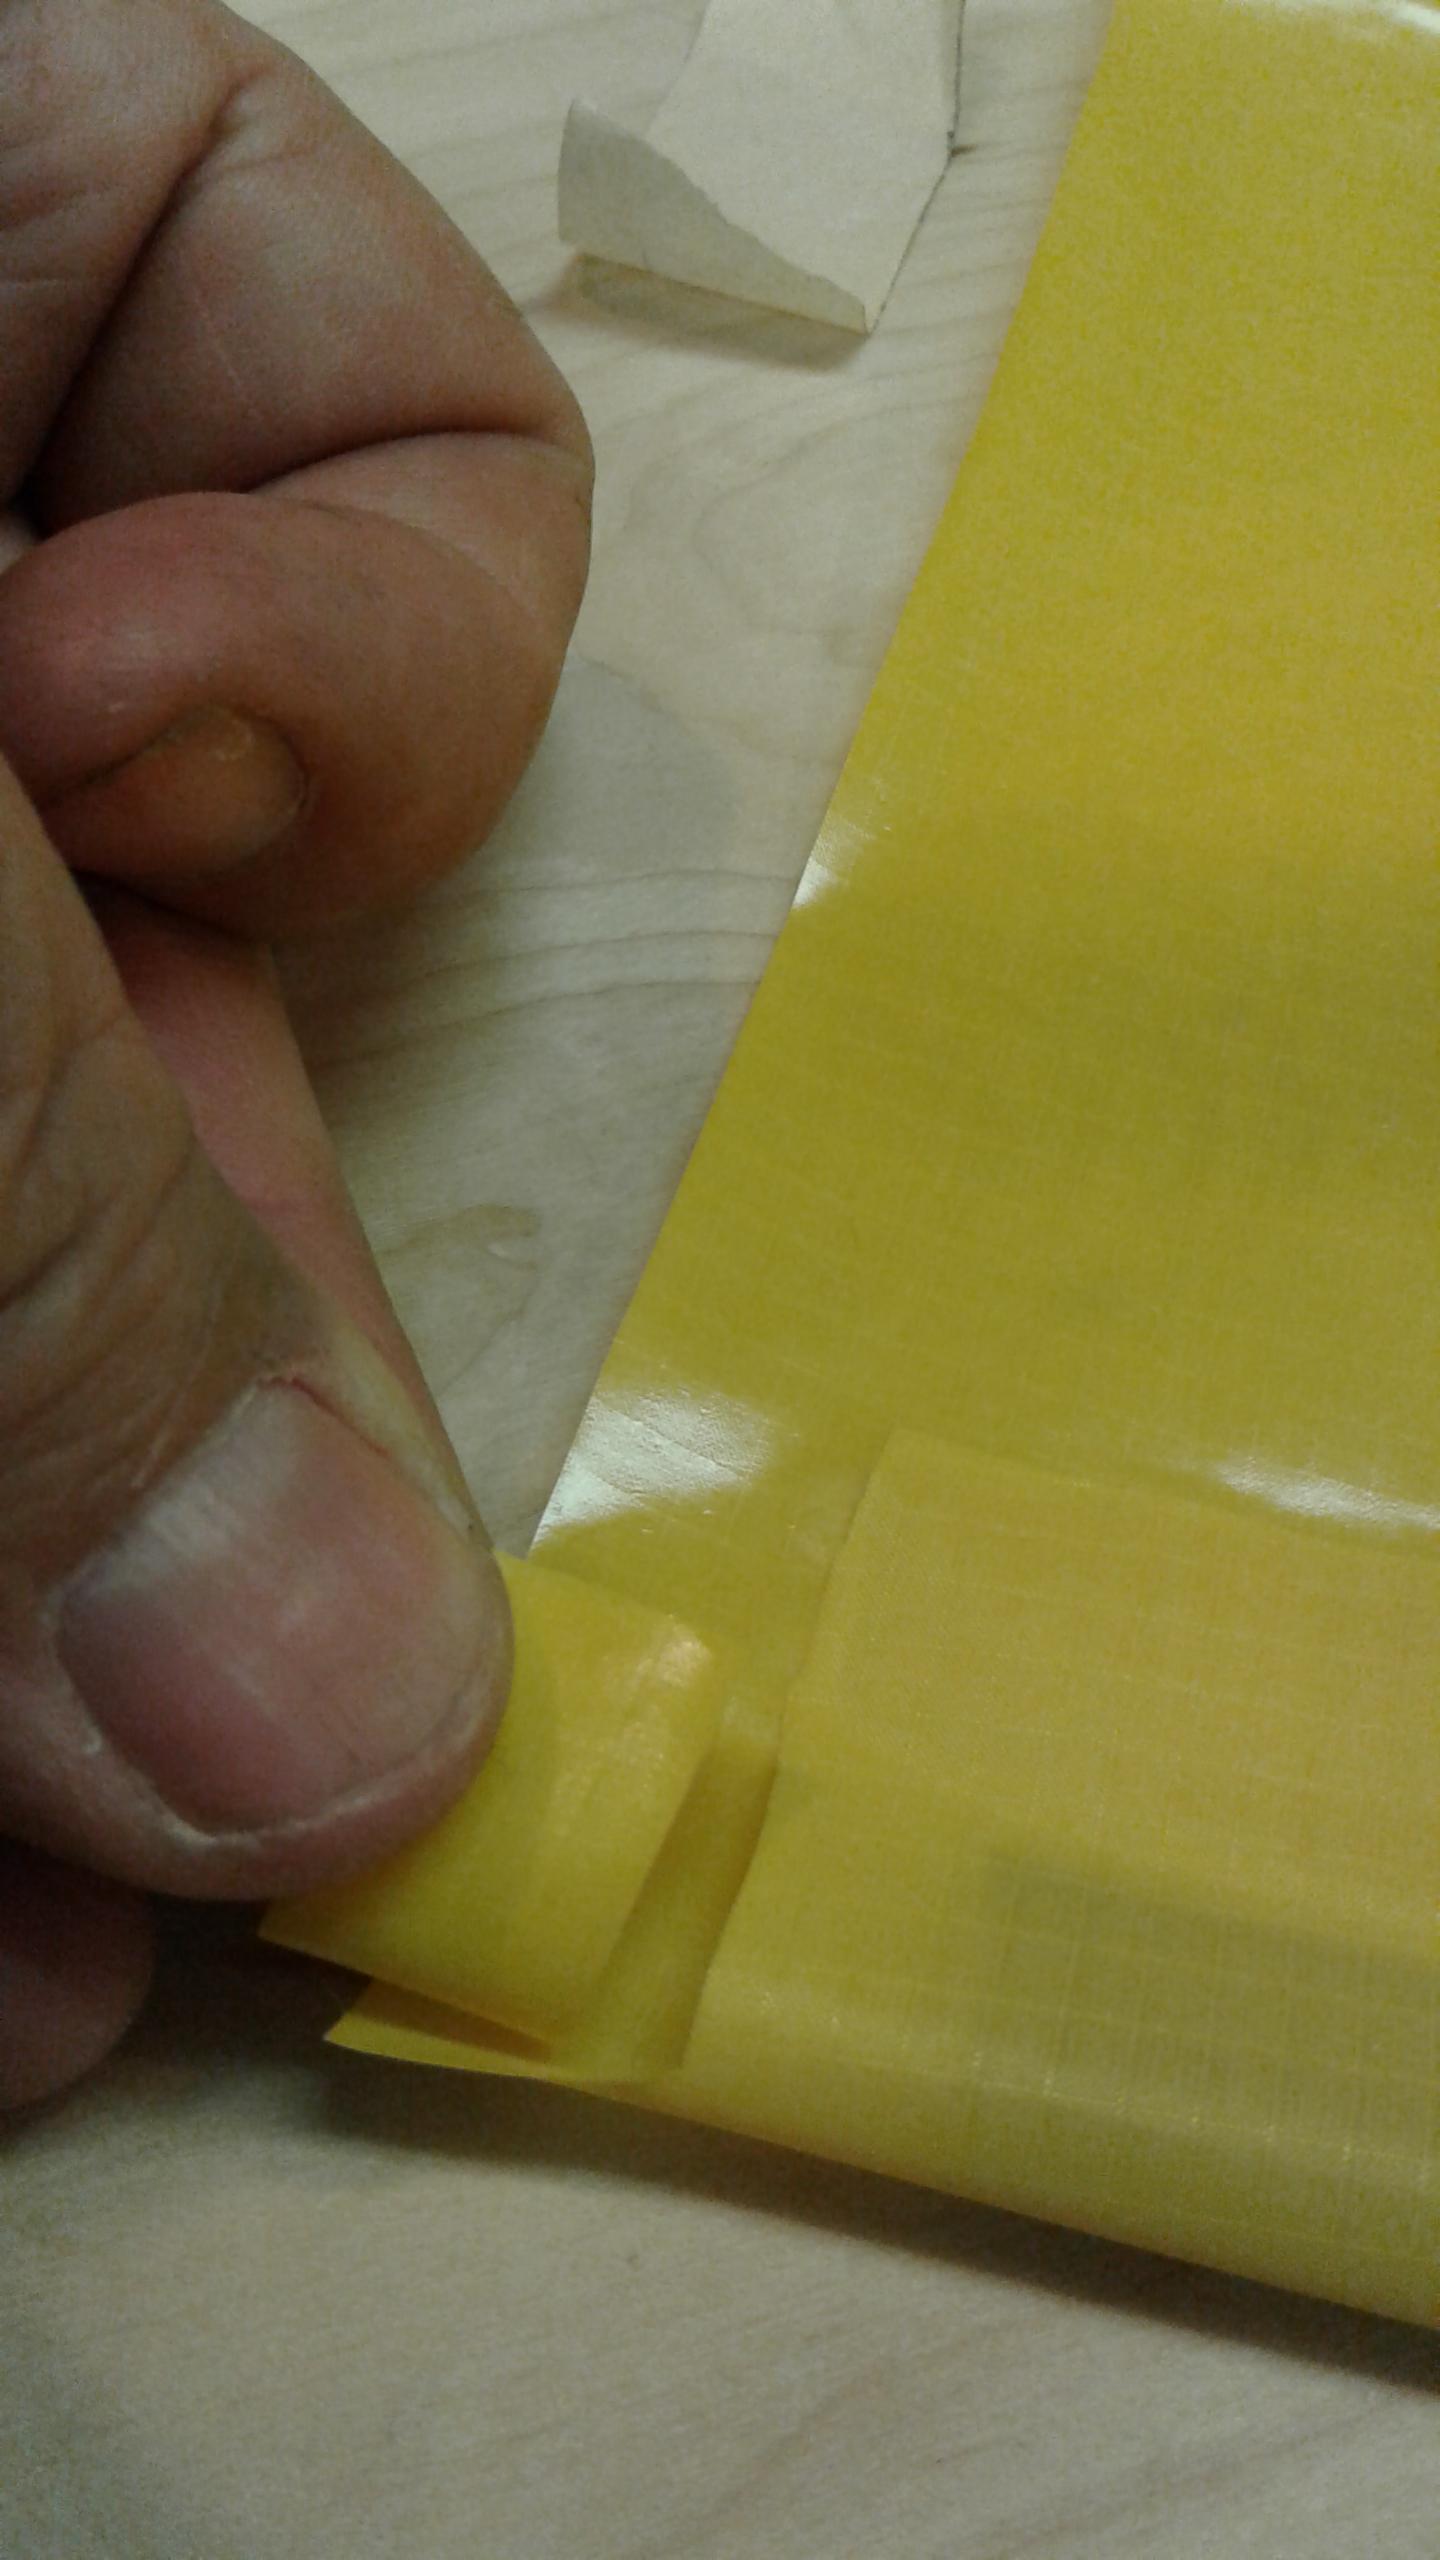 Reinforcing the webbing tube at the seam.